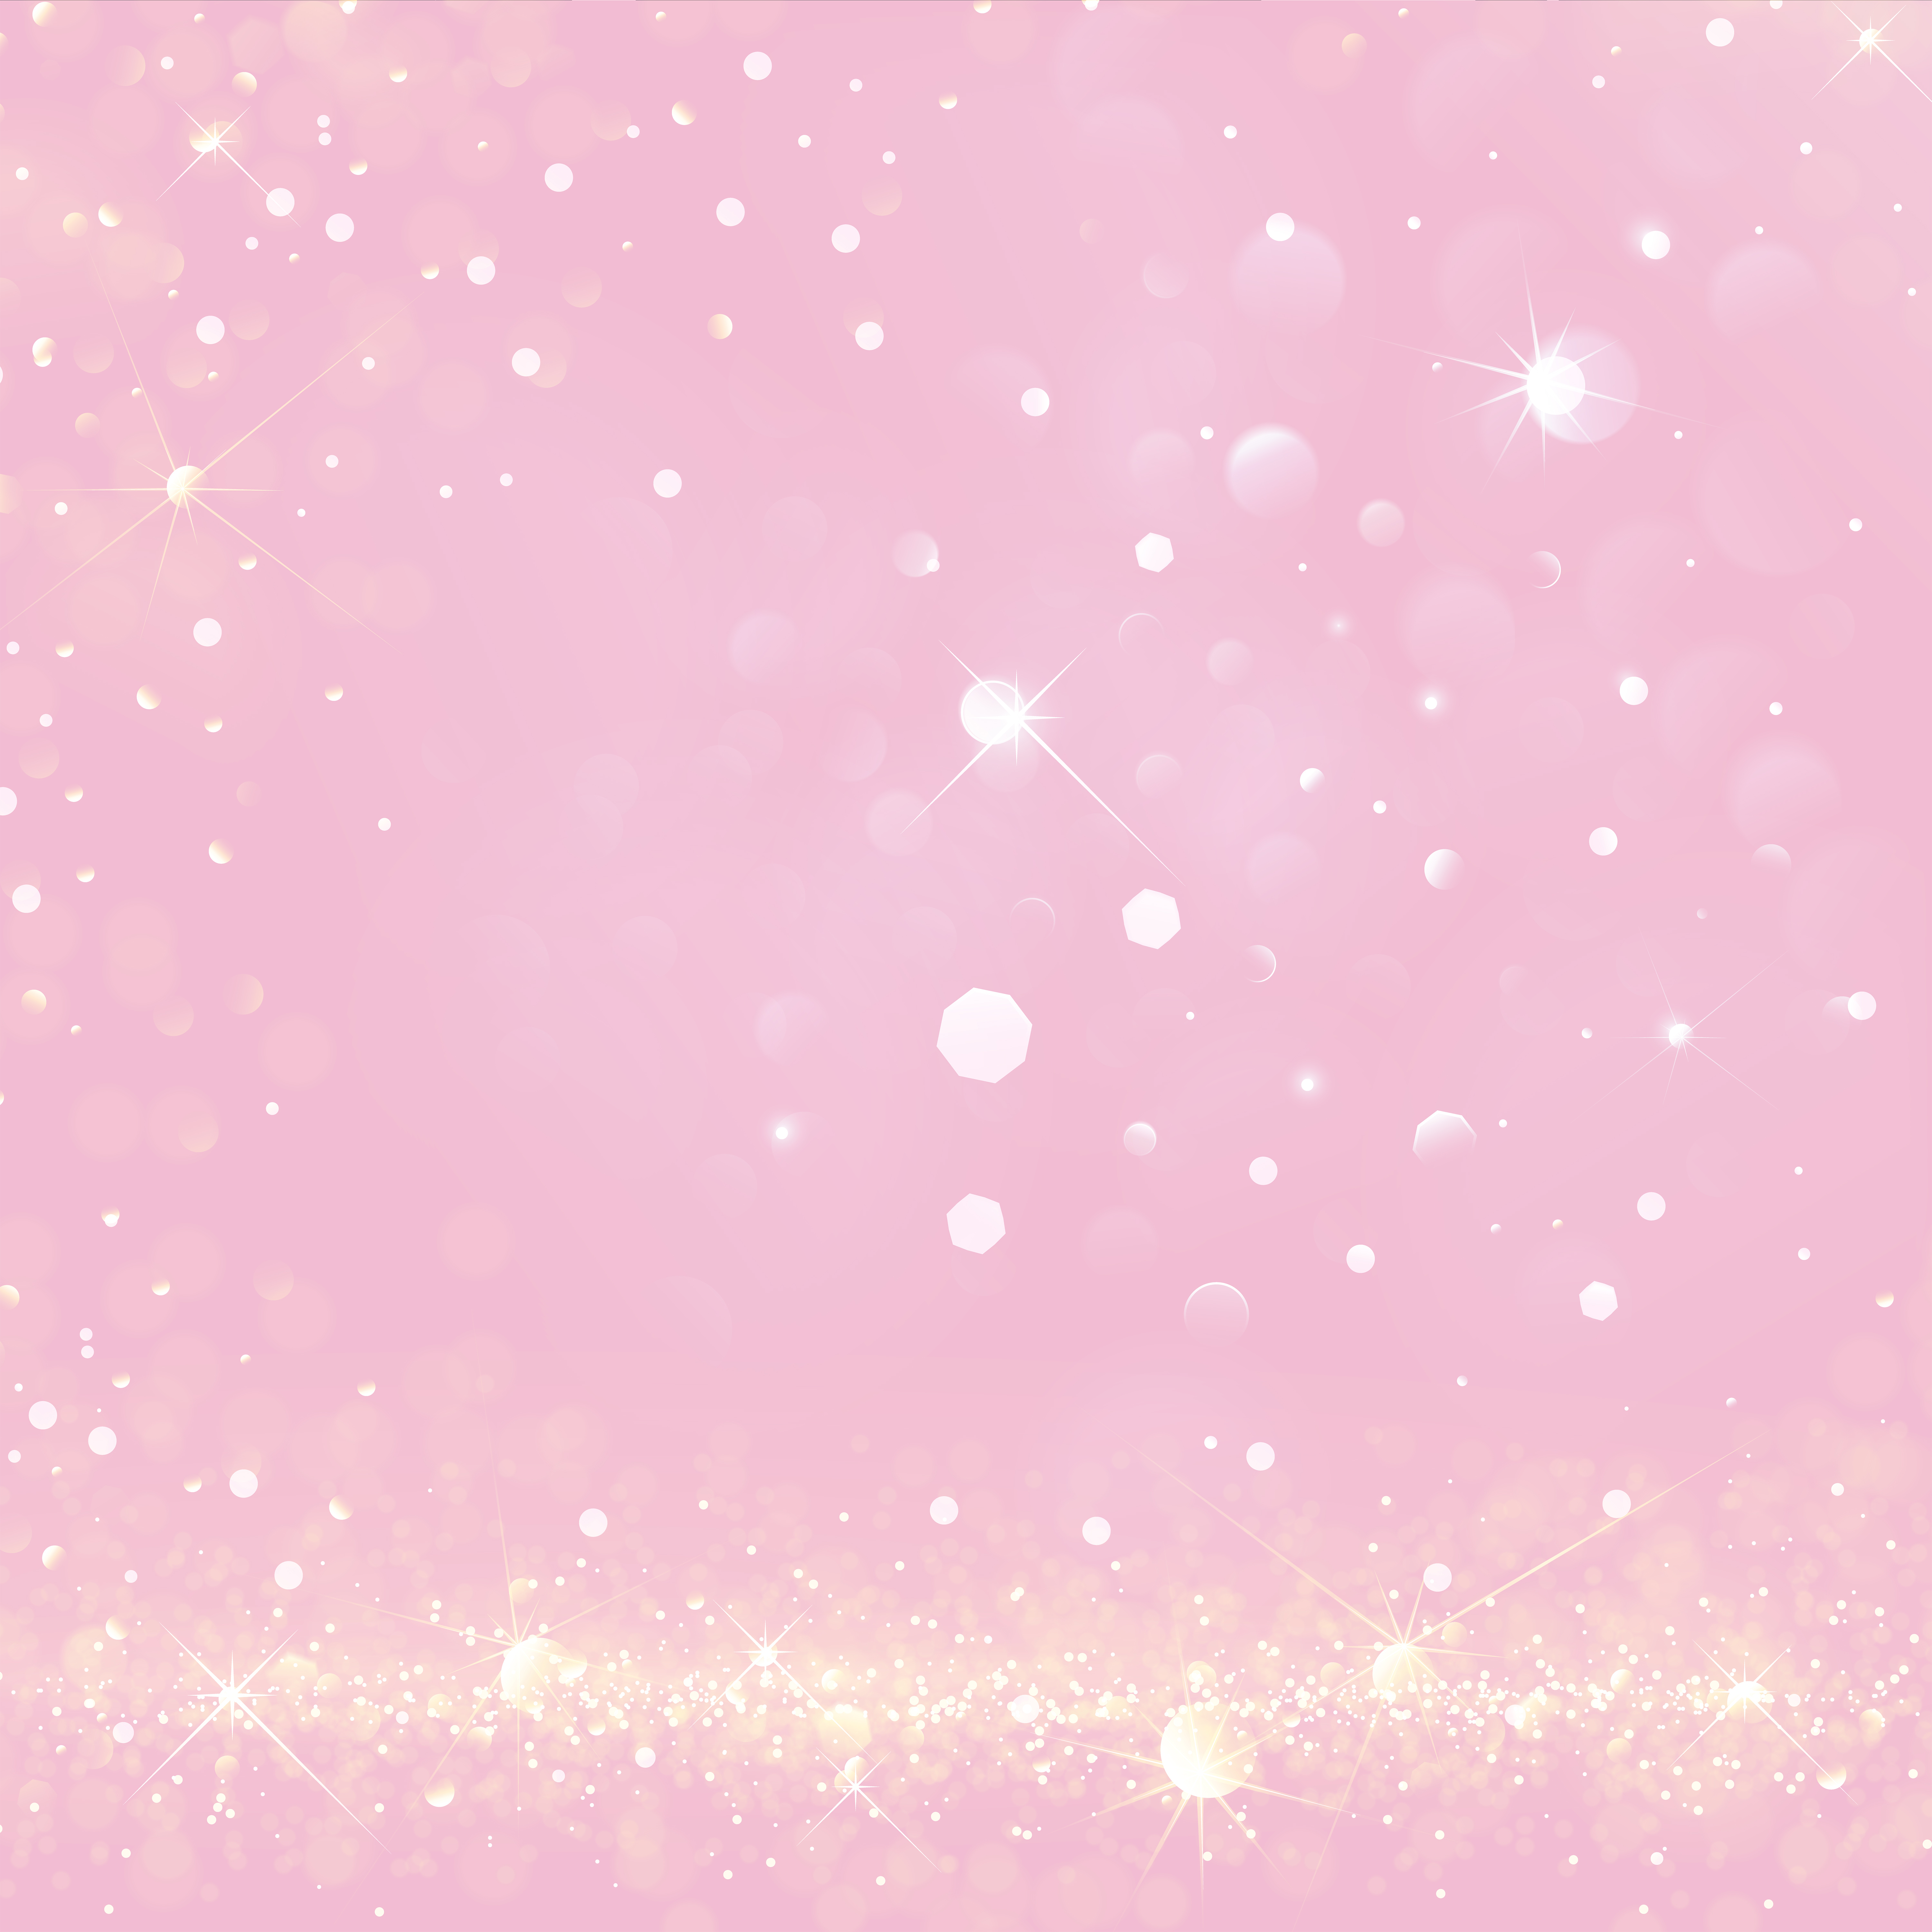 Pink Shining Background Gallery Yopriceville High Quality